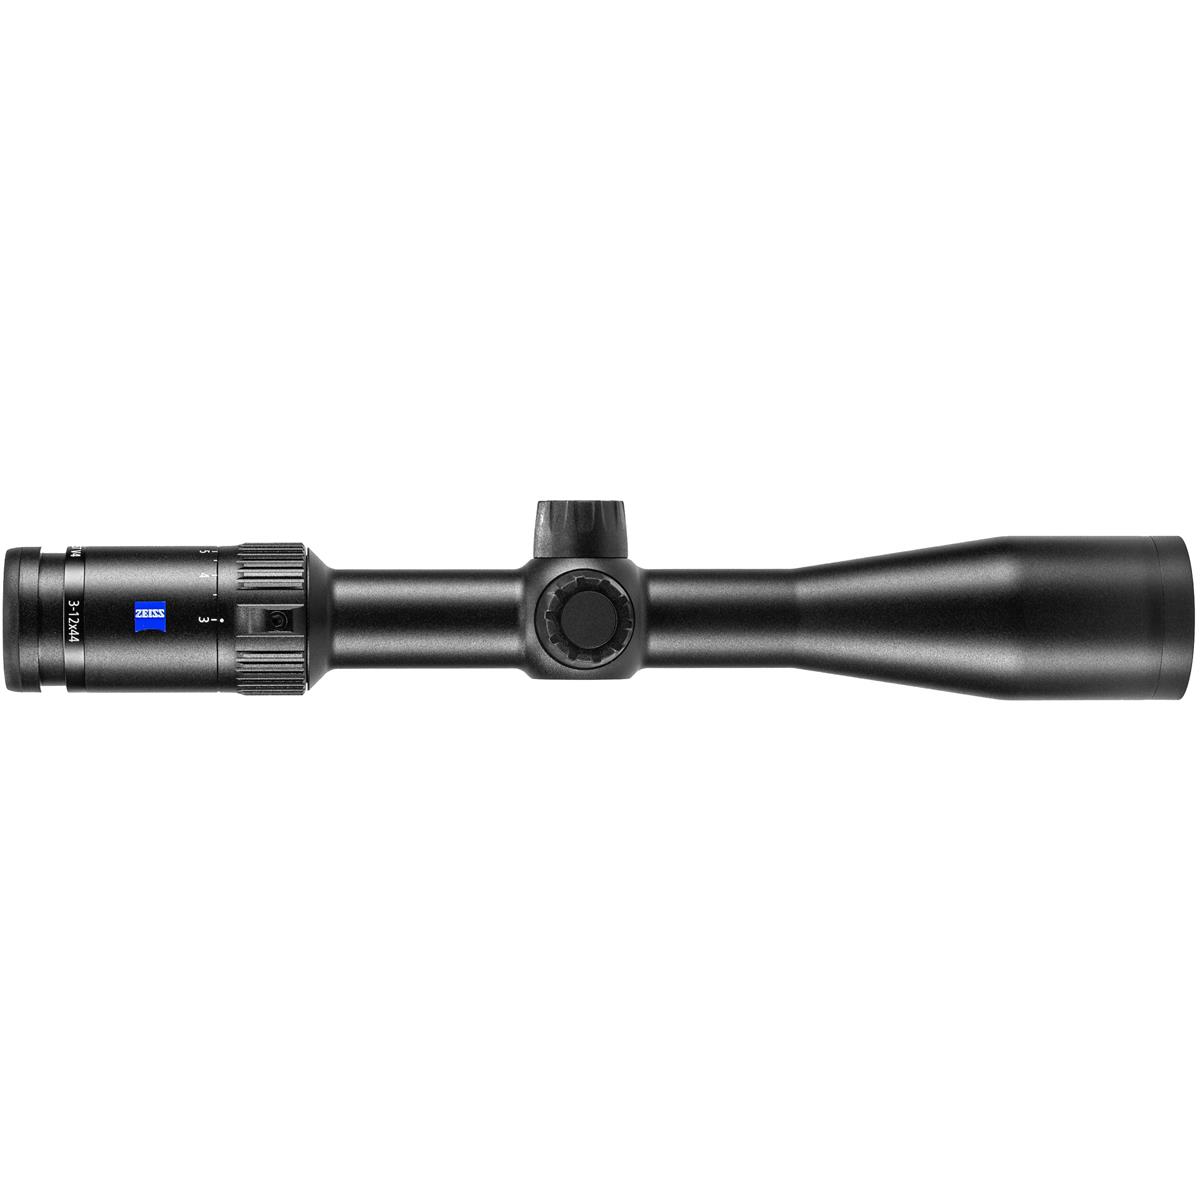 Zeiss Conquest V4 3-12x44mm Rifle Scope - Black -  522961 9920 000